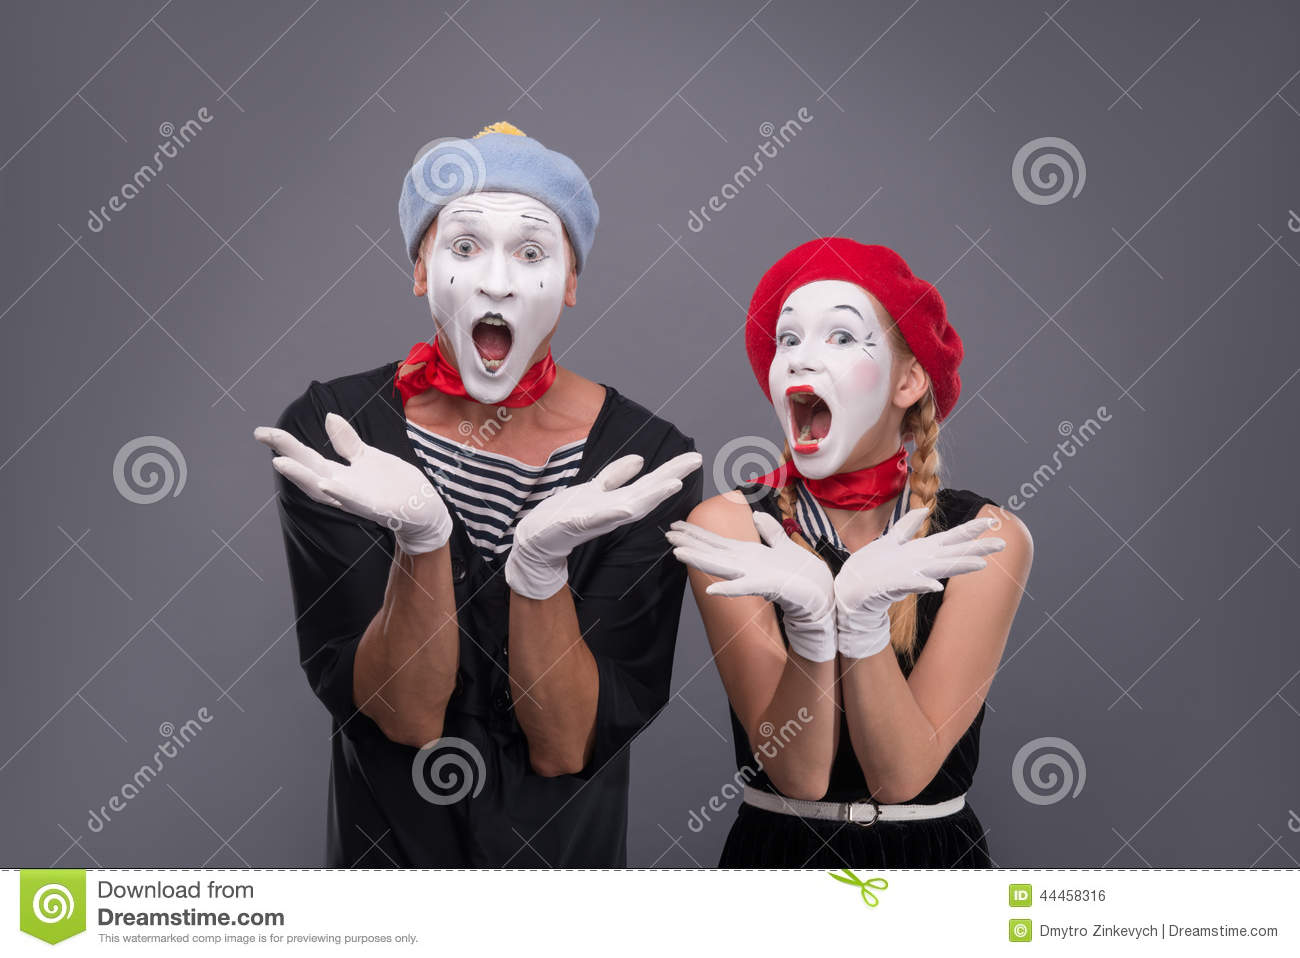 Portrait Of Funny Mime Couple With White Faces And Stock Photo   Image